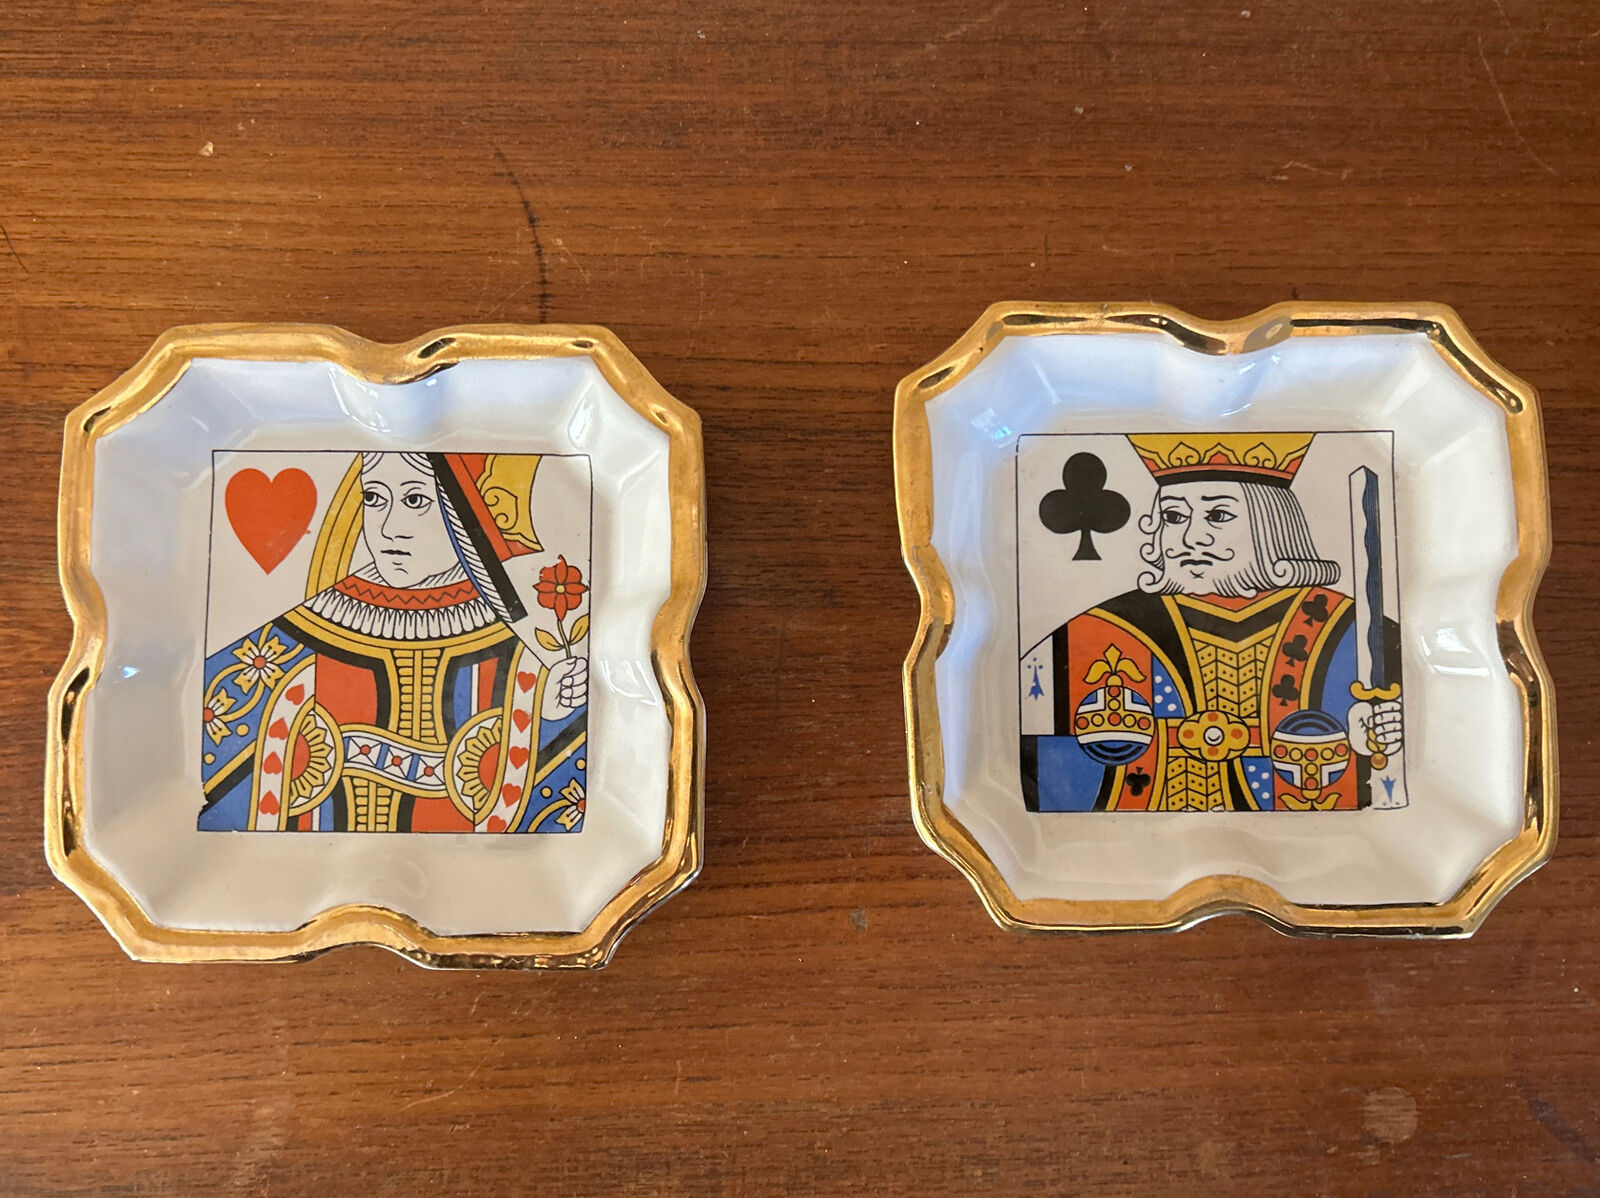 Rometti Italy Ceramic King And Queen Playing Card Ashtray 1960s Swingers Cool